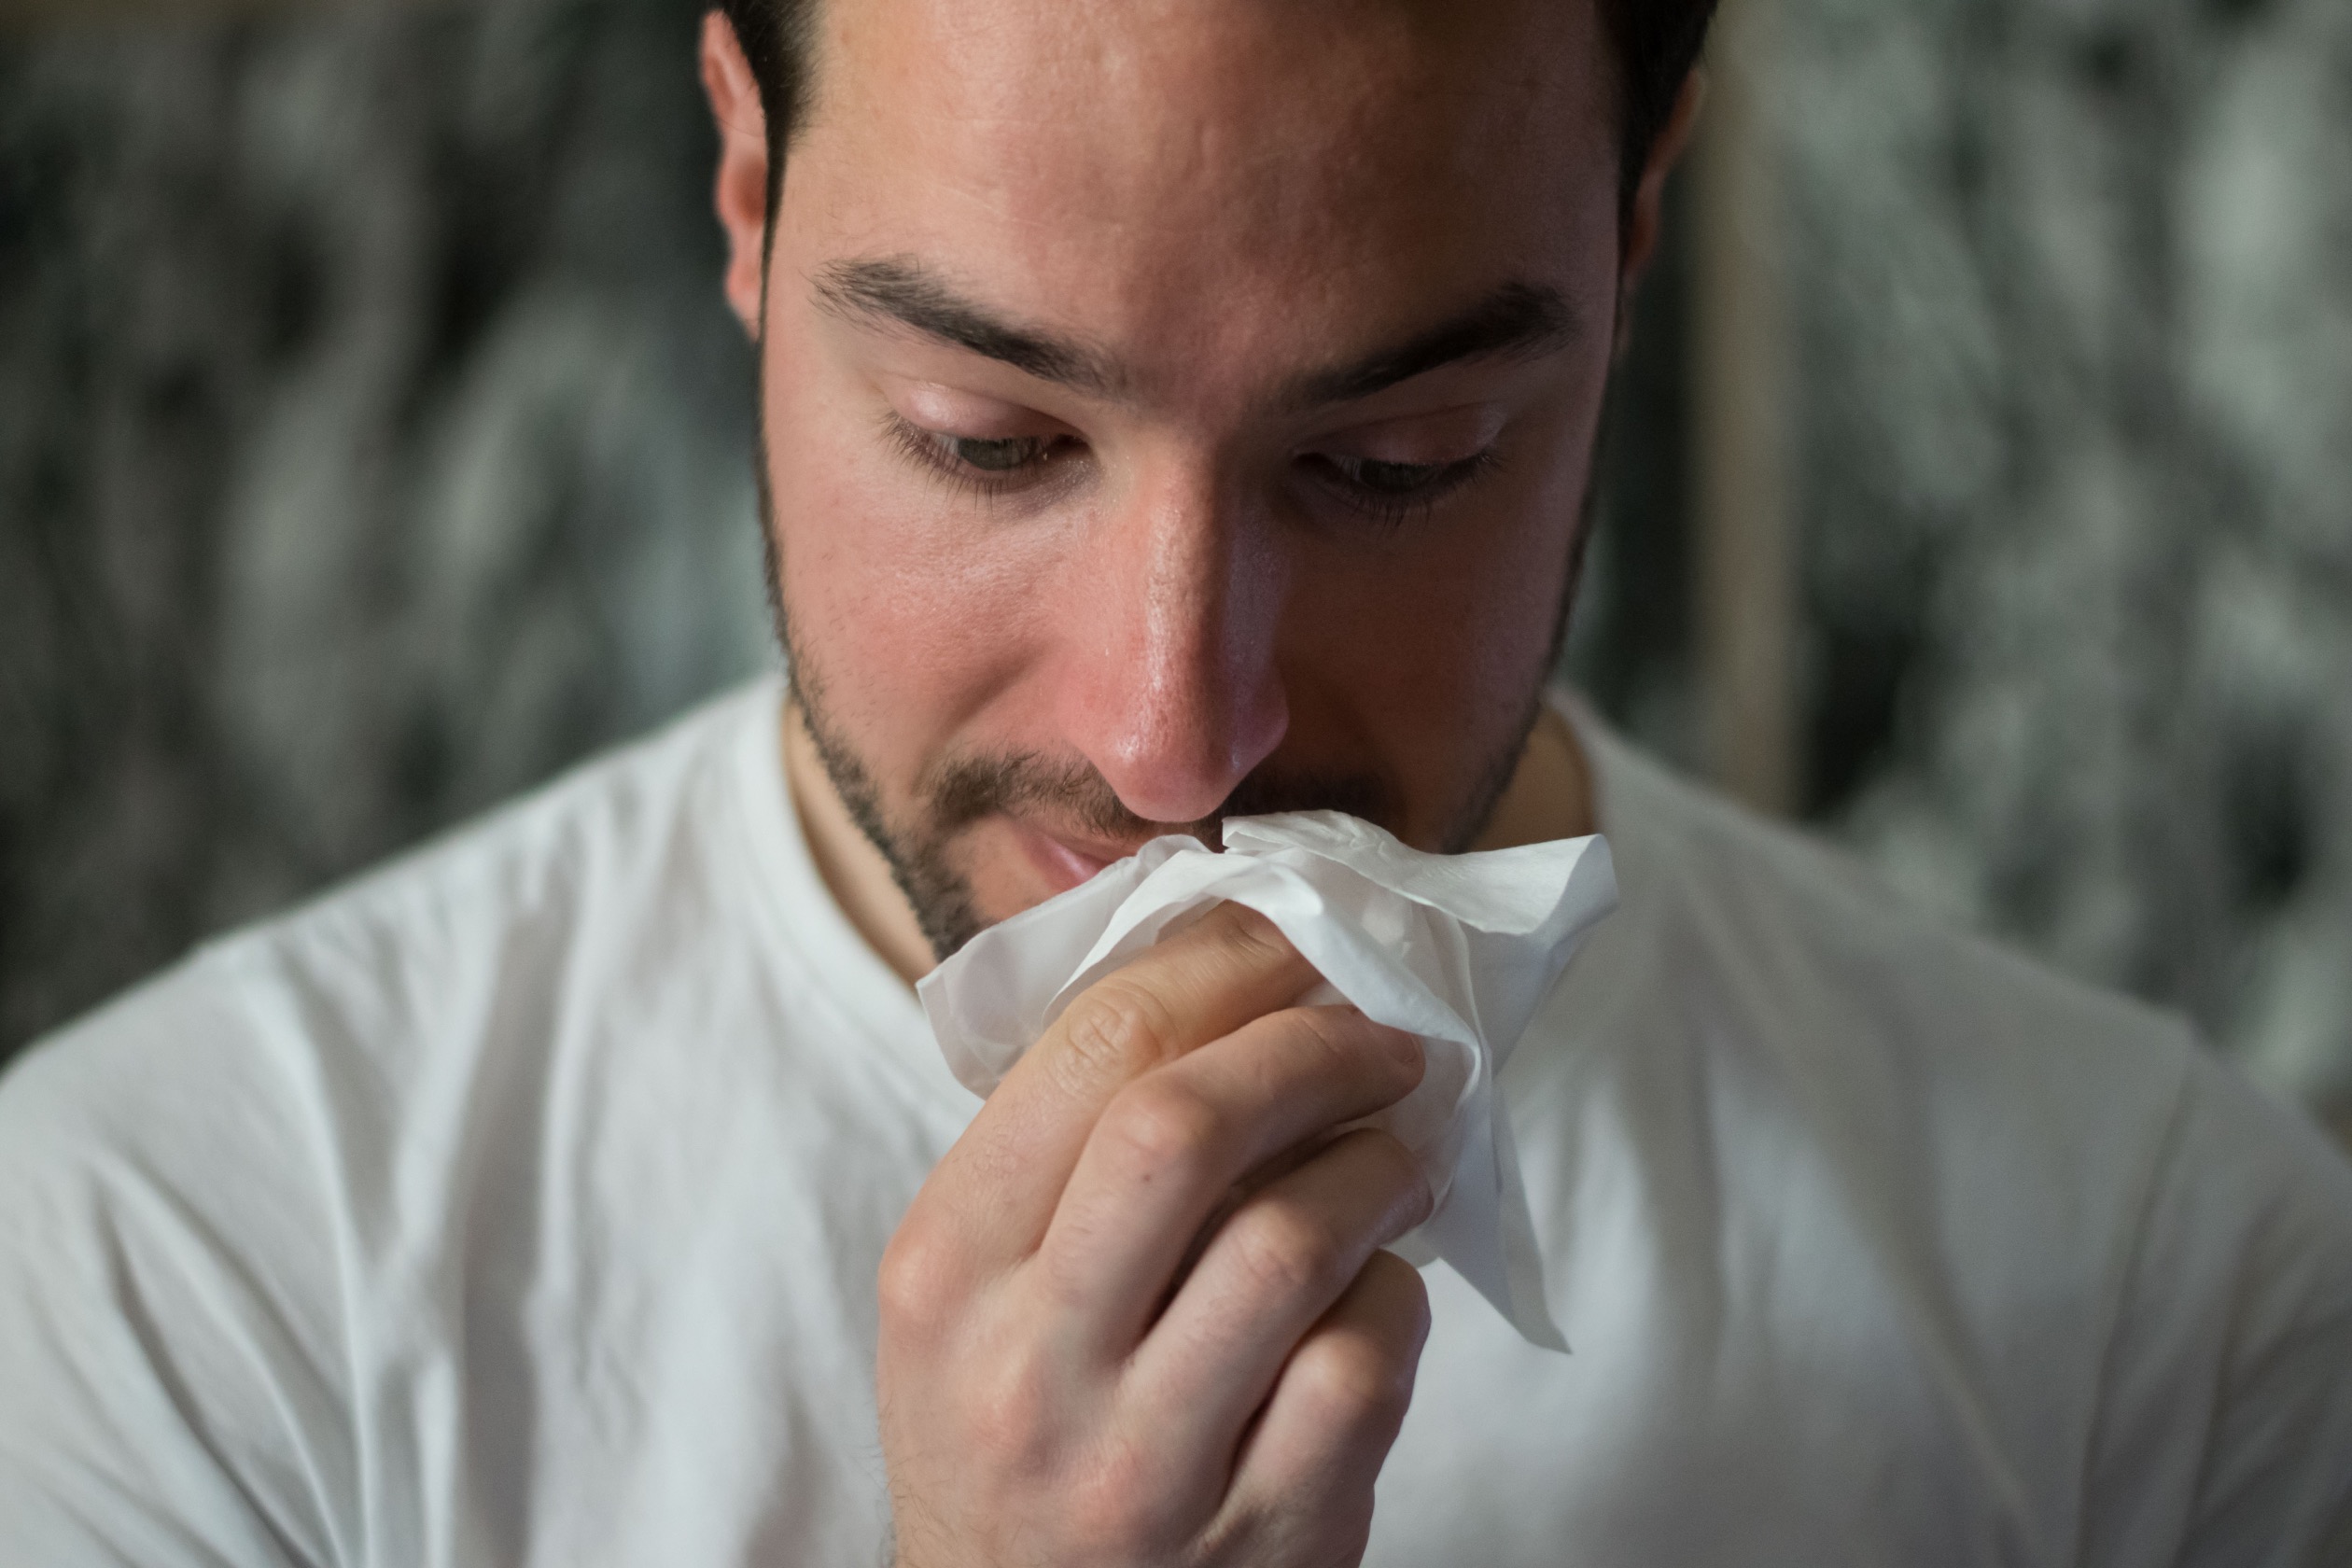 A man holding a tissue to his face while looking downward.